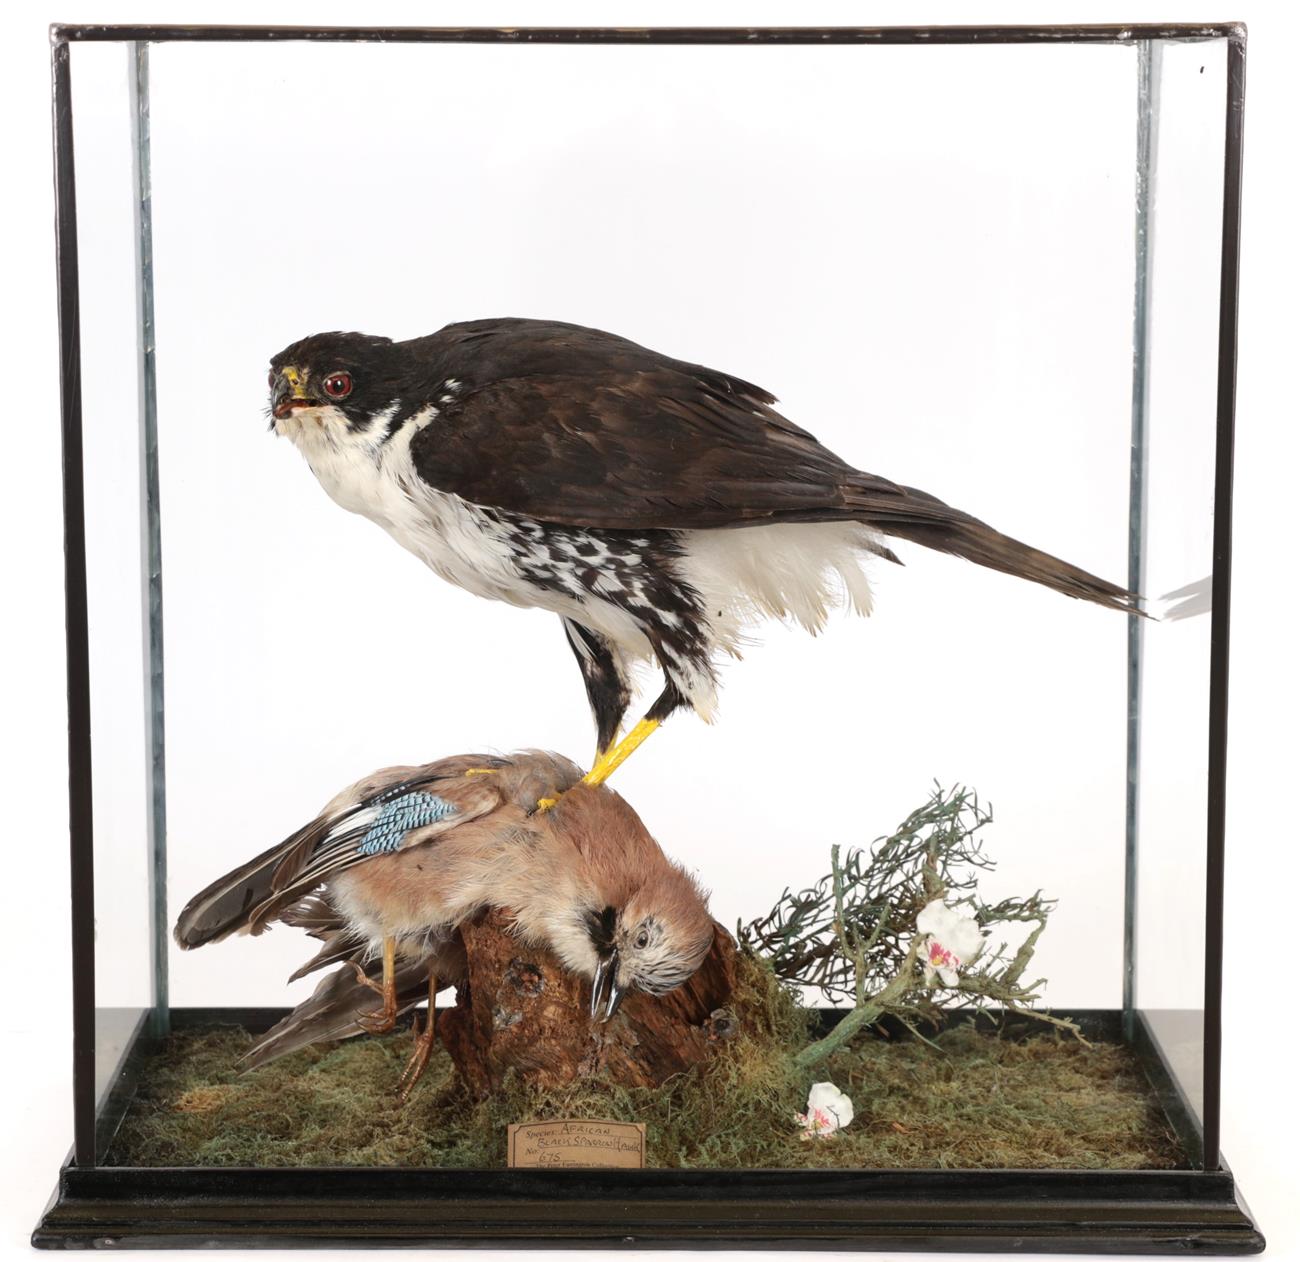 Lot 54 - Taxidermy: A Cased African Black Sparrowhawk (Accipiter melanoleucus), circa 2002, captive bred, by